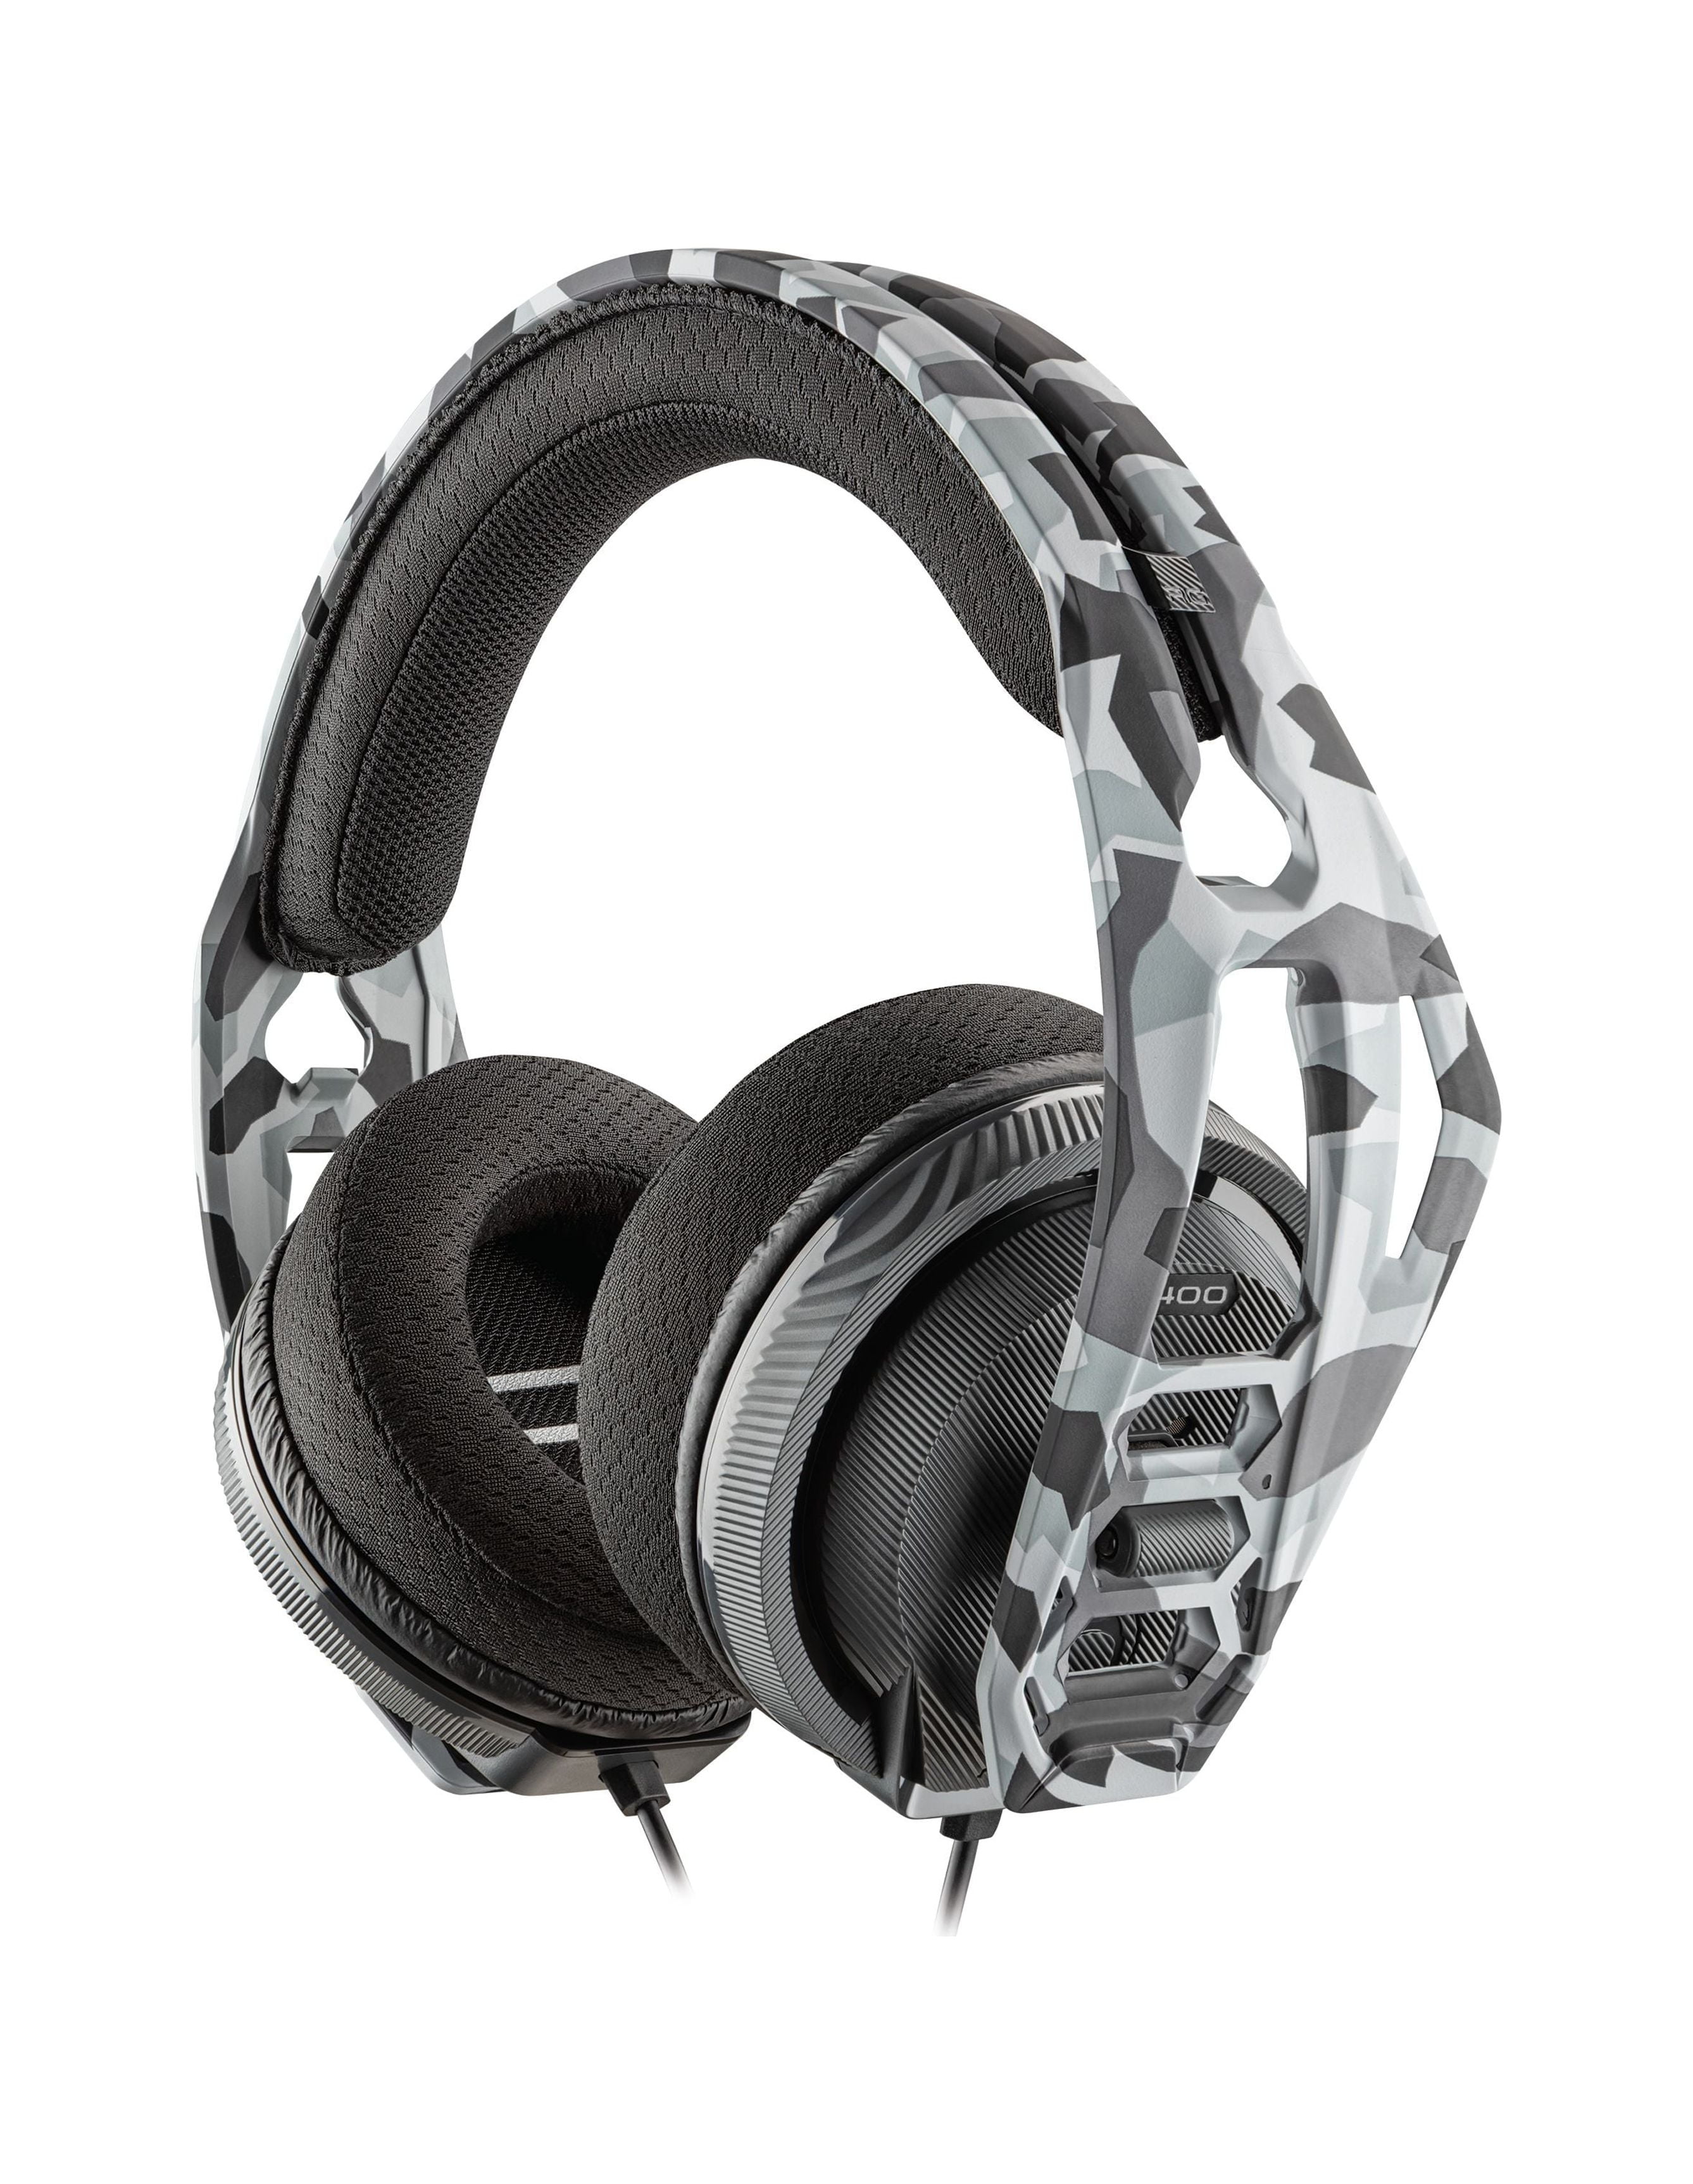 RIG 400 HS PlayStation Gaming Headset for PlayStation, PC & Mobile, Camo